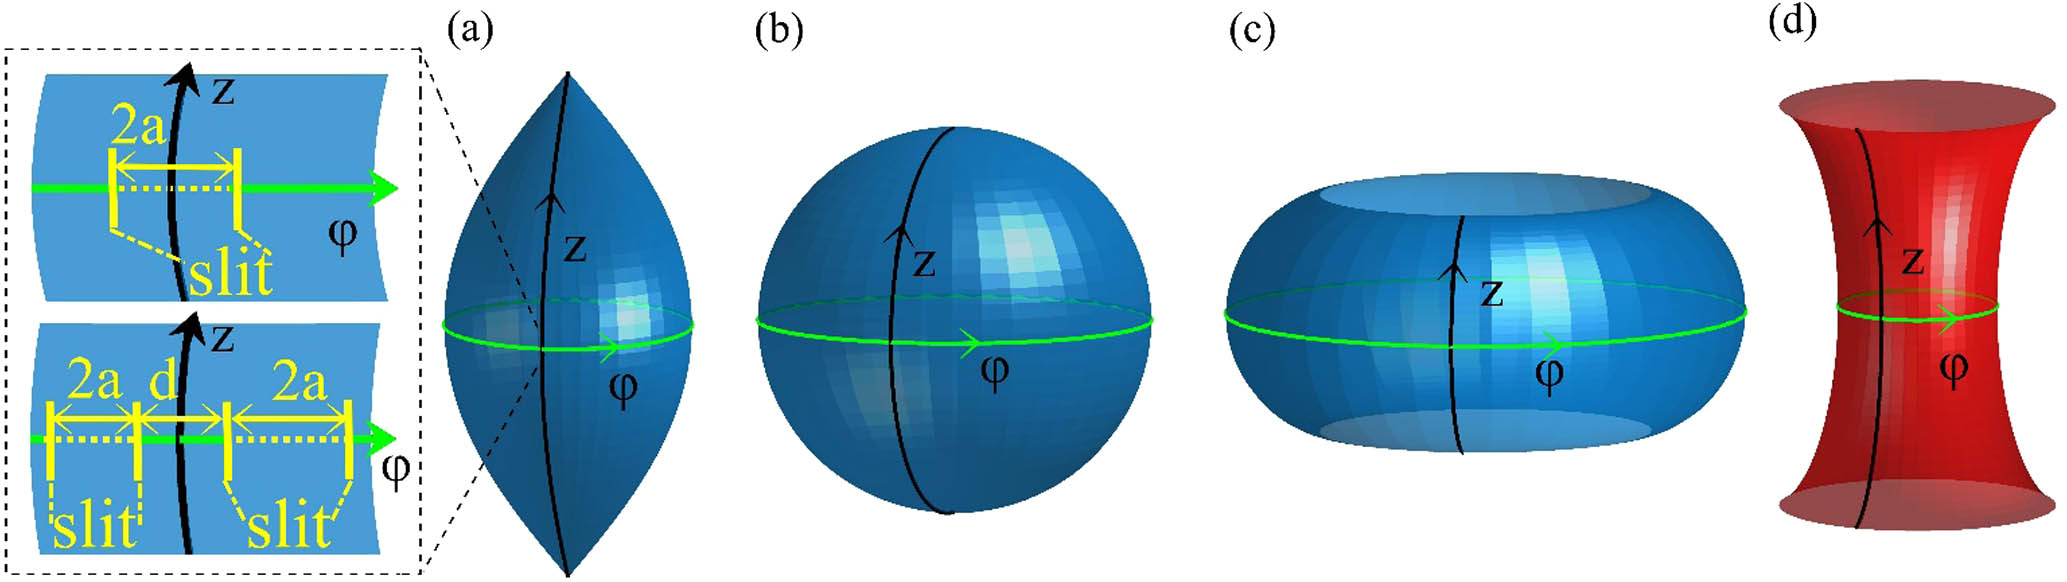 SORs with constant (a)–(c) positive and (d) negative Gaussian curvature K. Here (a) spindle with r0<R, (b) sphere with r0=R, and (c) bulge with r0>R, where R=|K|−12 is the radius of Gaussian curvature, and r0 is an initial rotational radius (or radius of equator) at z=0. The black/green solid lines are the lines of longitude/equator. The inset on the left side of (a) shows the schematic of a single slit (up) and double slits (down) on surface, which are located at the equator (z=0).